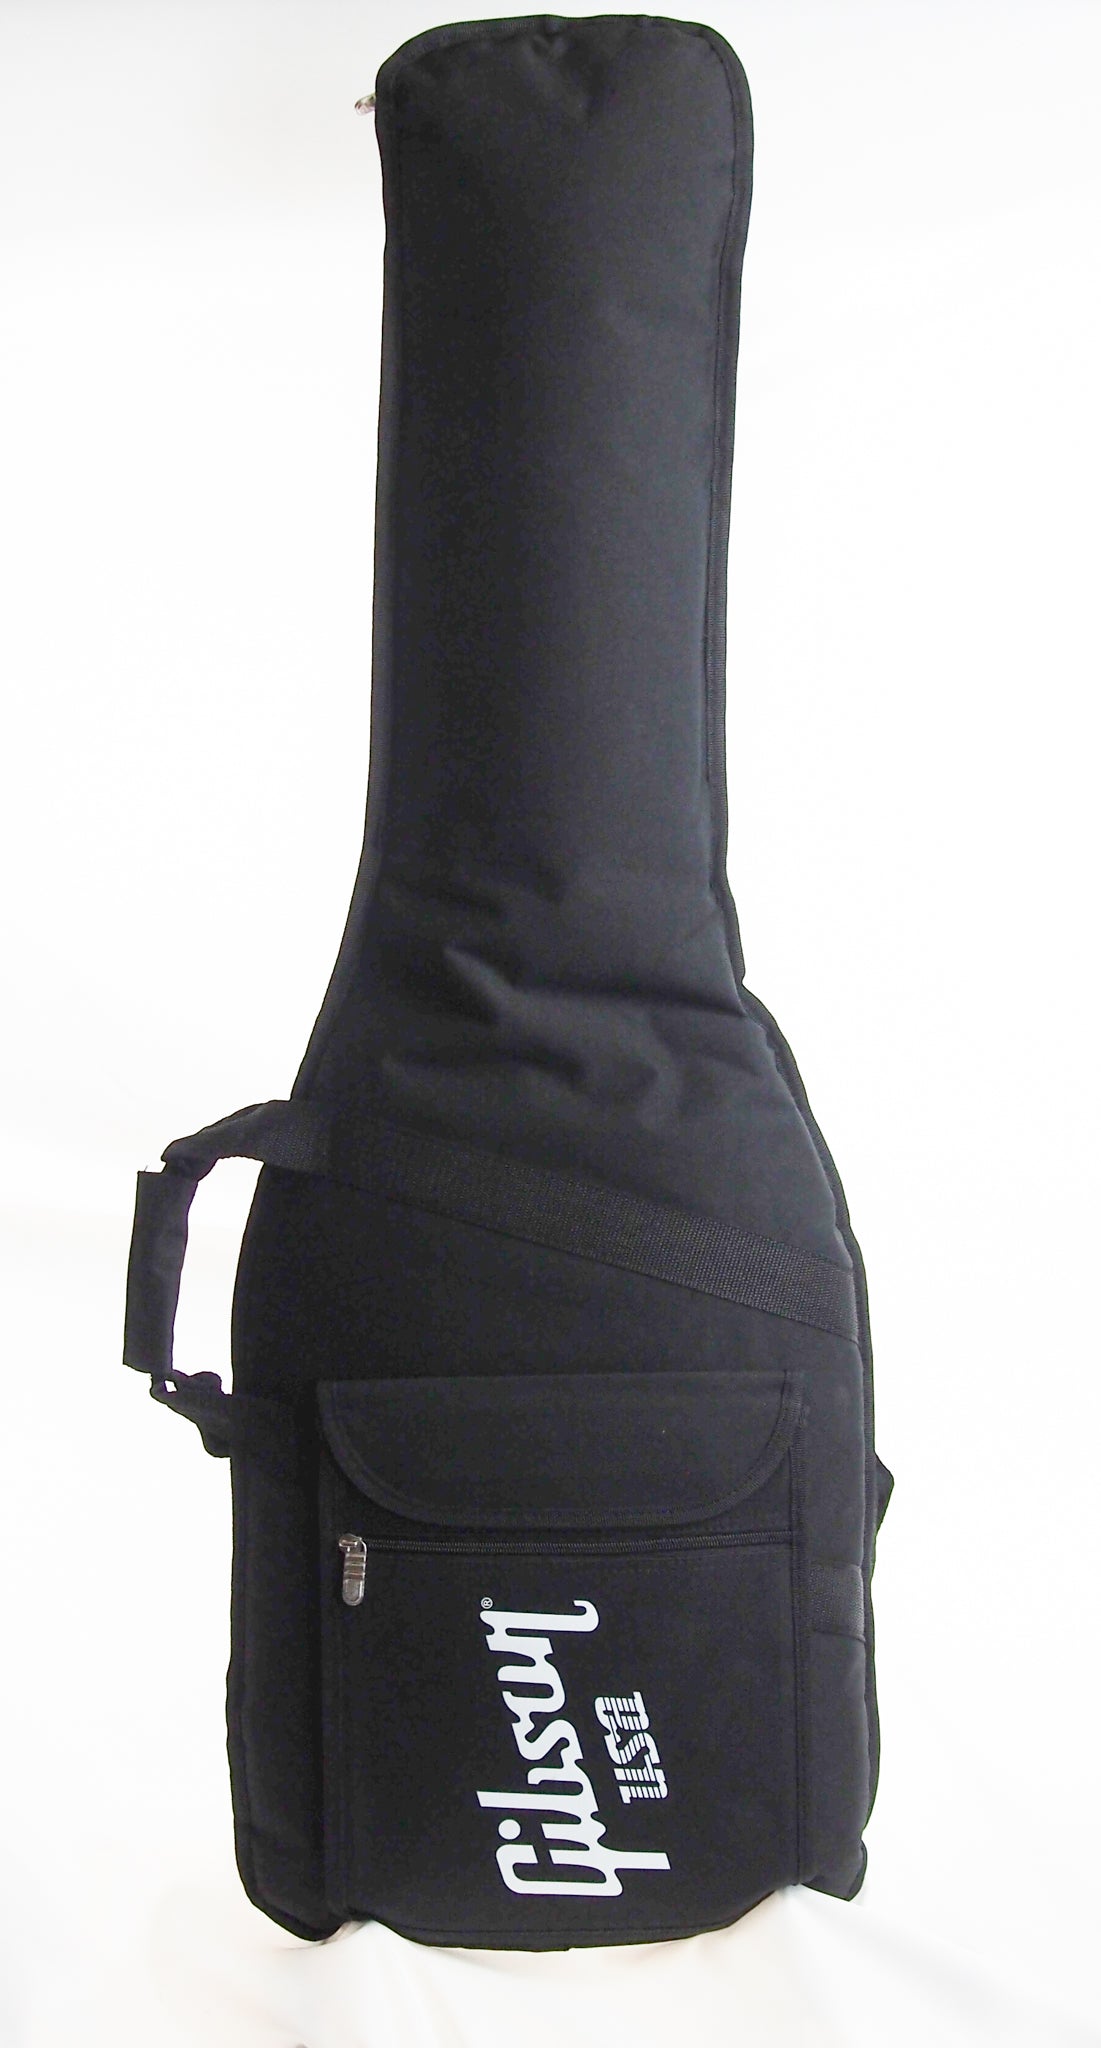 Gibson USA A9308/dlx universal gigbags LOT OF TWO, black with deluxe white interior.